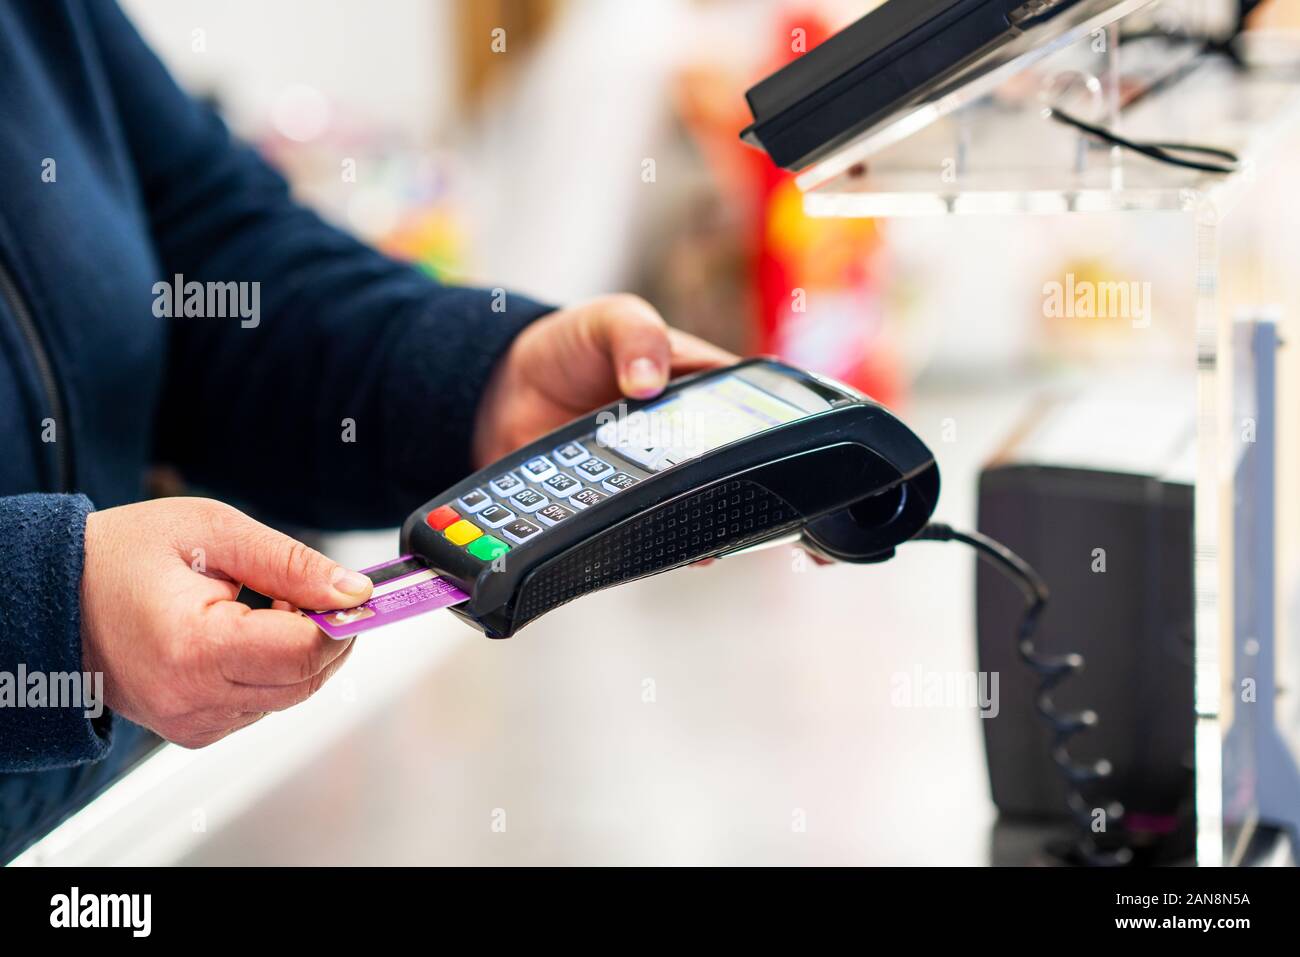 Hand with creditcard swipe through pos terminal for payment in a shop. Stock Photo